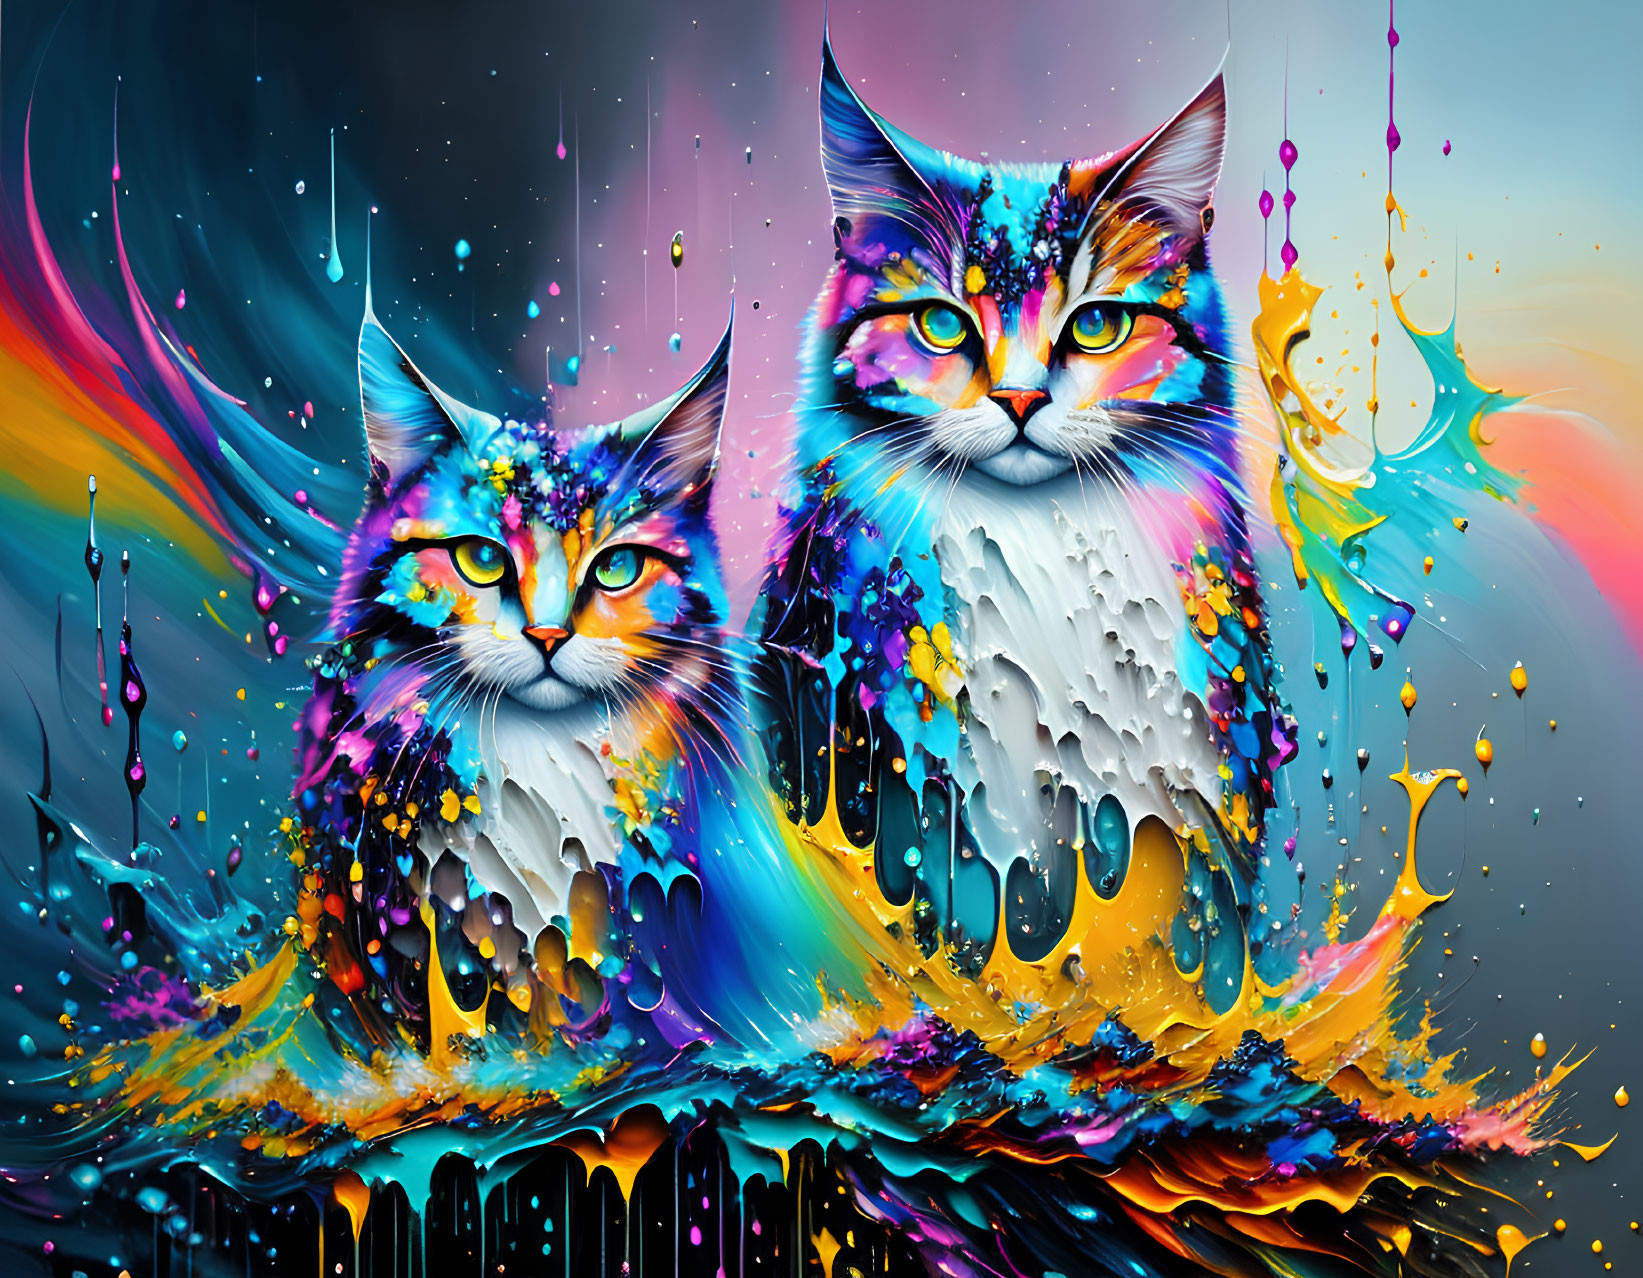 Colorful Cosmic Cat Artwork with Abstract Background